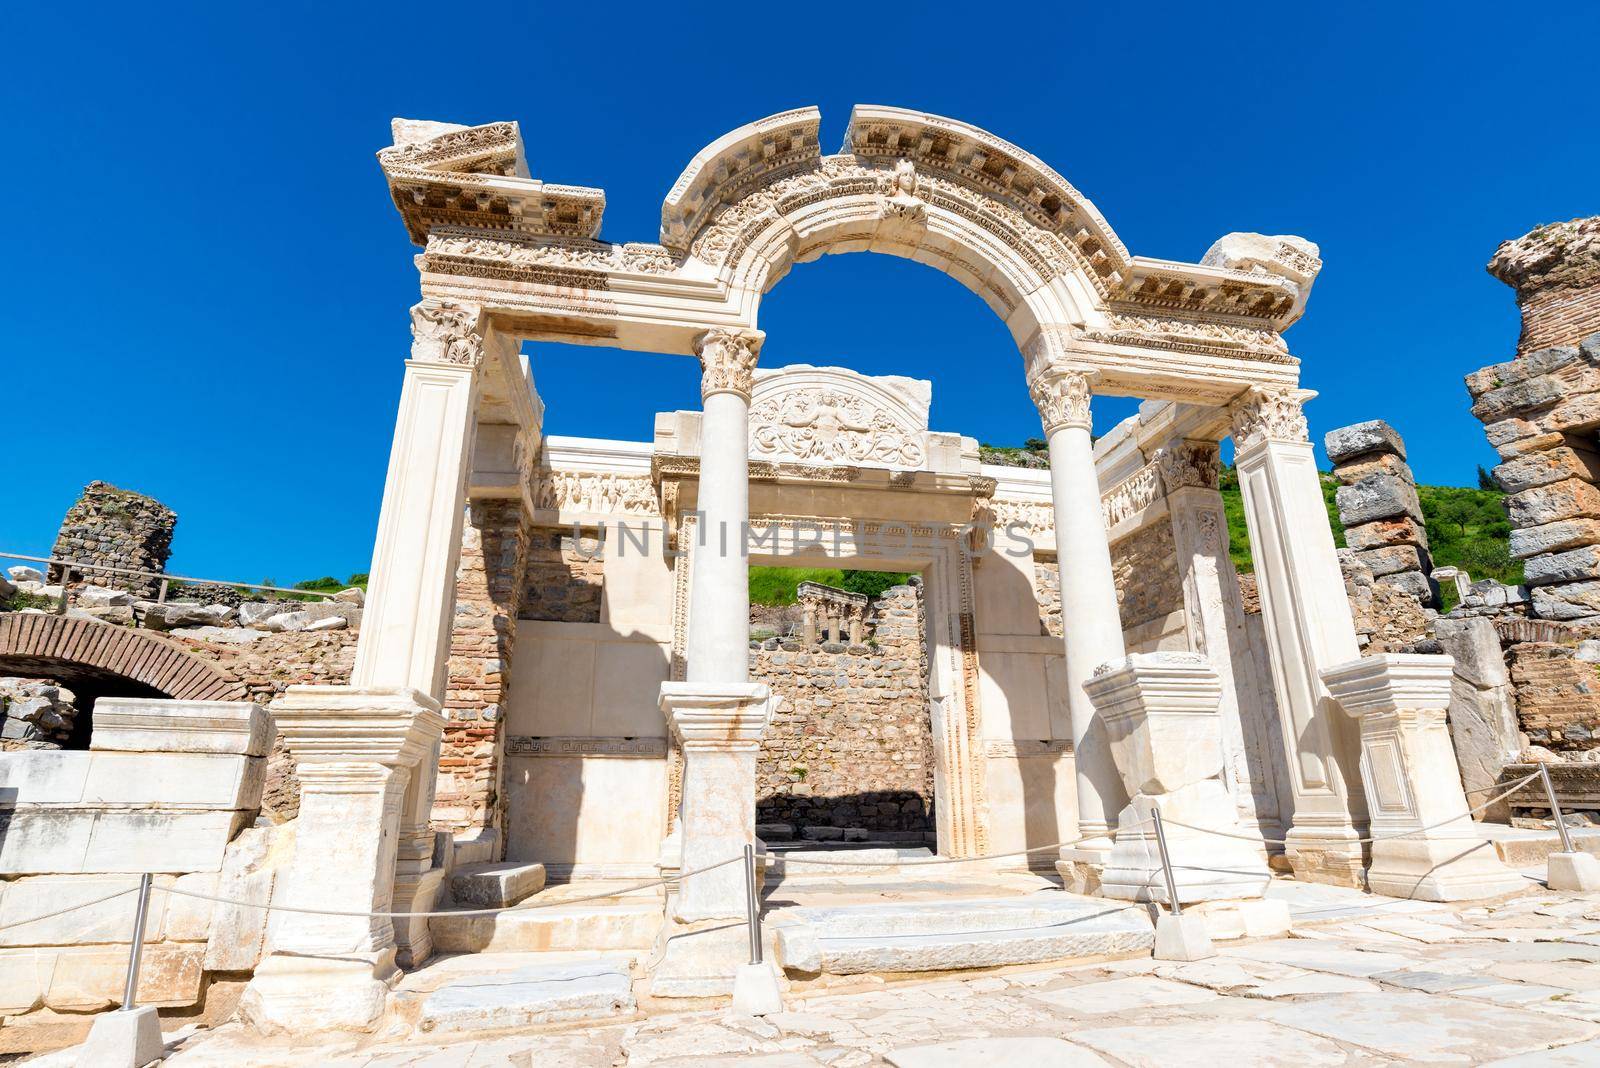 Ancient ruins in Ephesus Turkey, Ephesus contains the ancient largest collection of Roman ruins in the eastern,Turkey by Nuamfolio